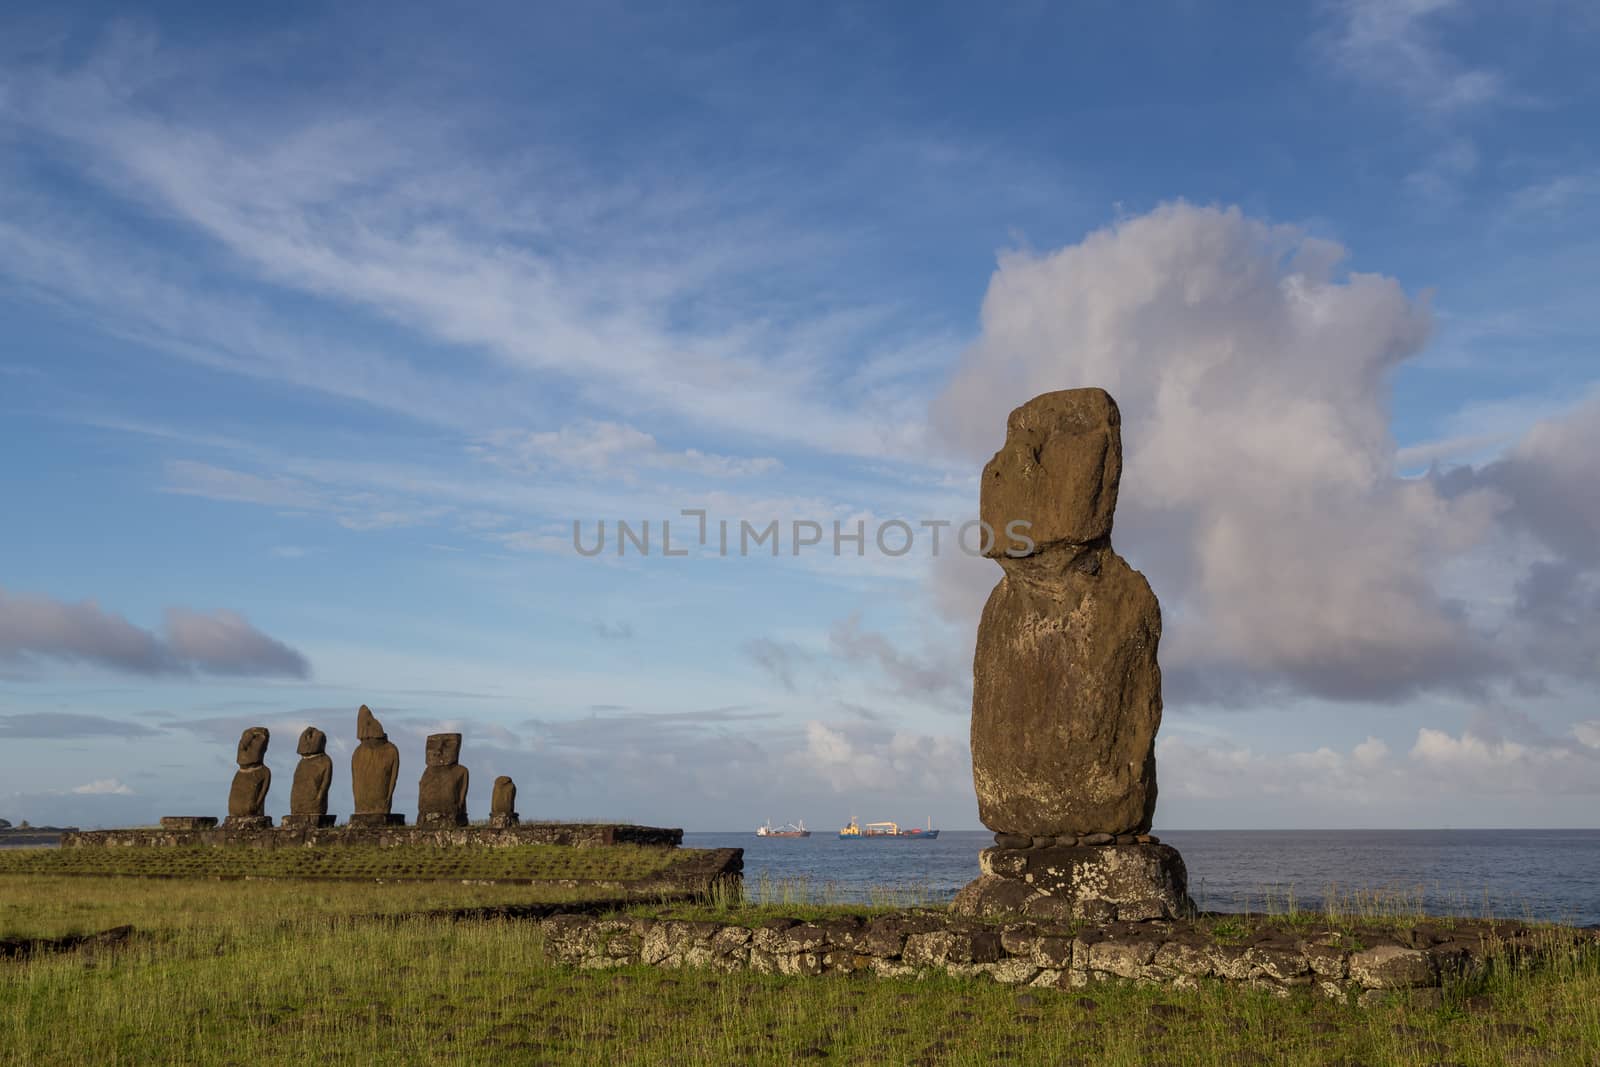 Photograph of the moais at Ahu Tahai on Easter Island in Chile in morning light.